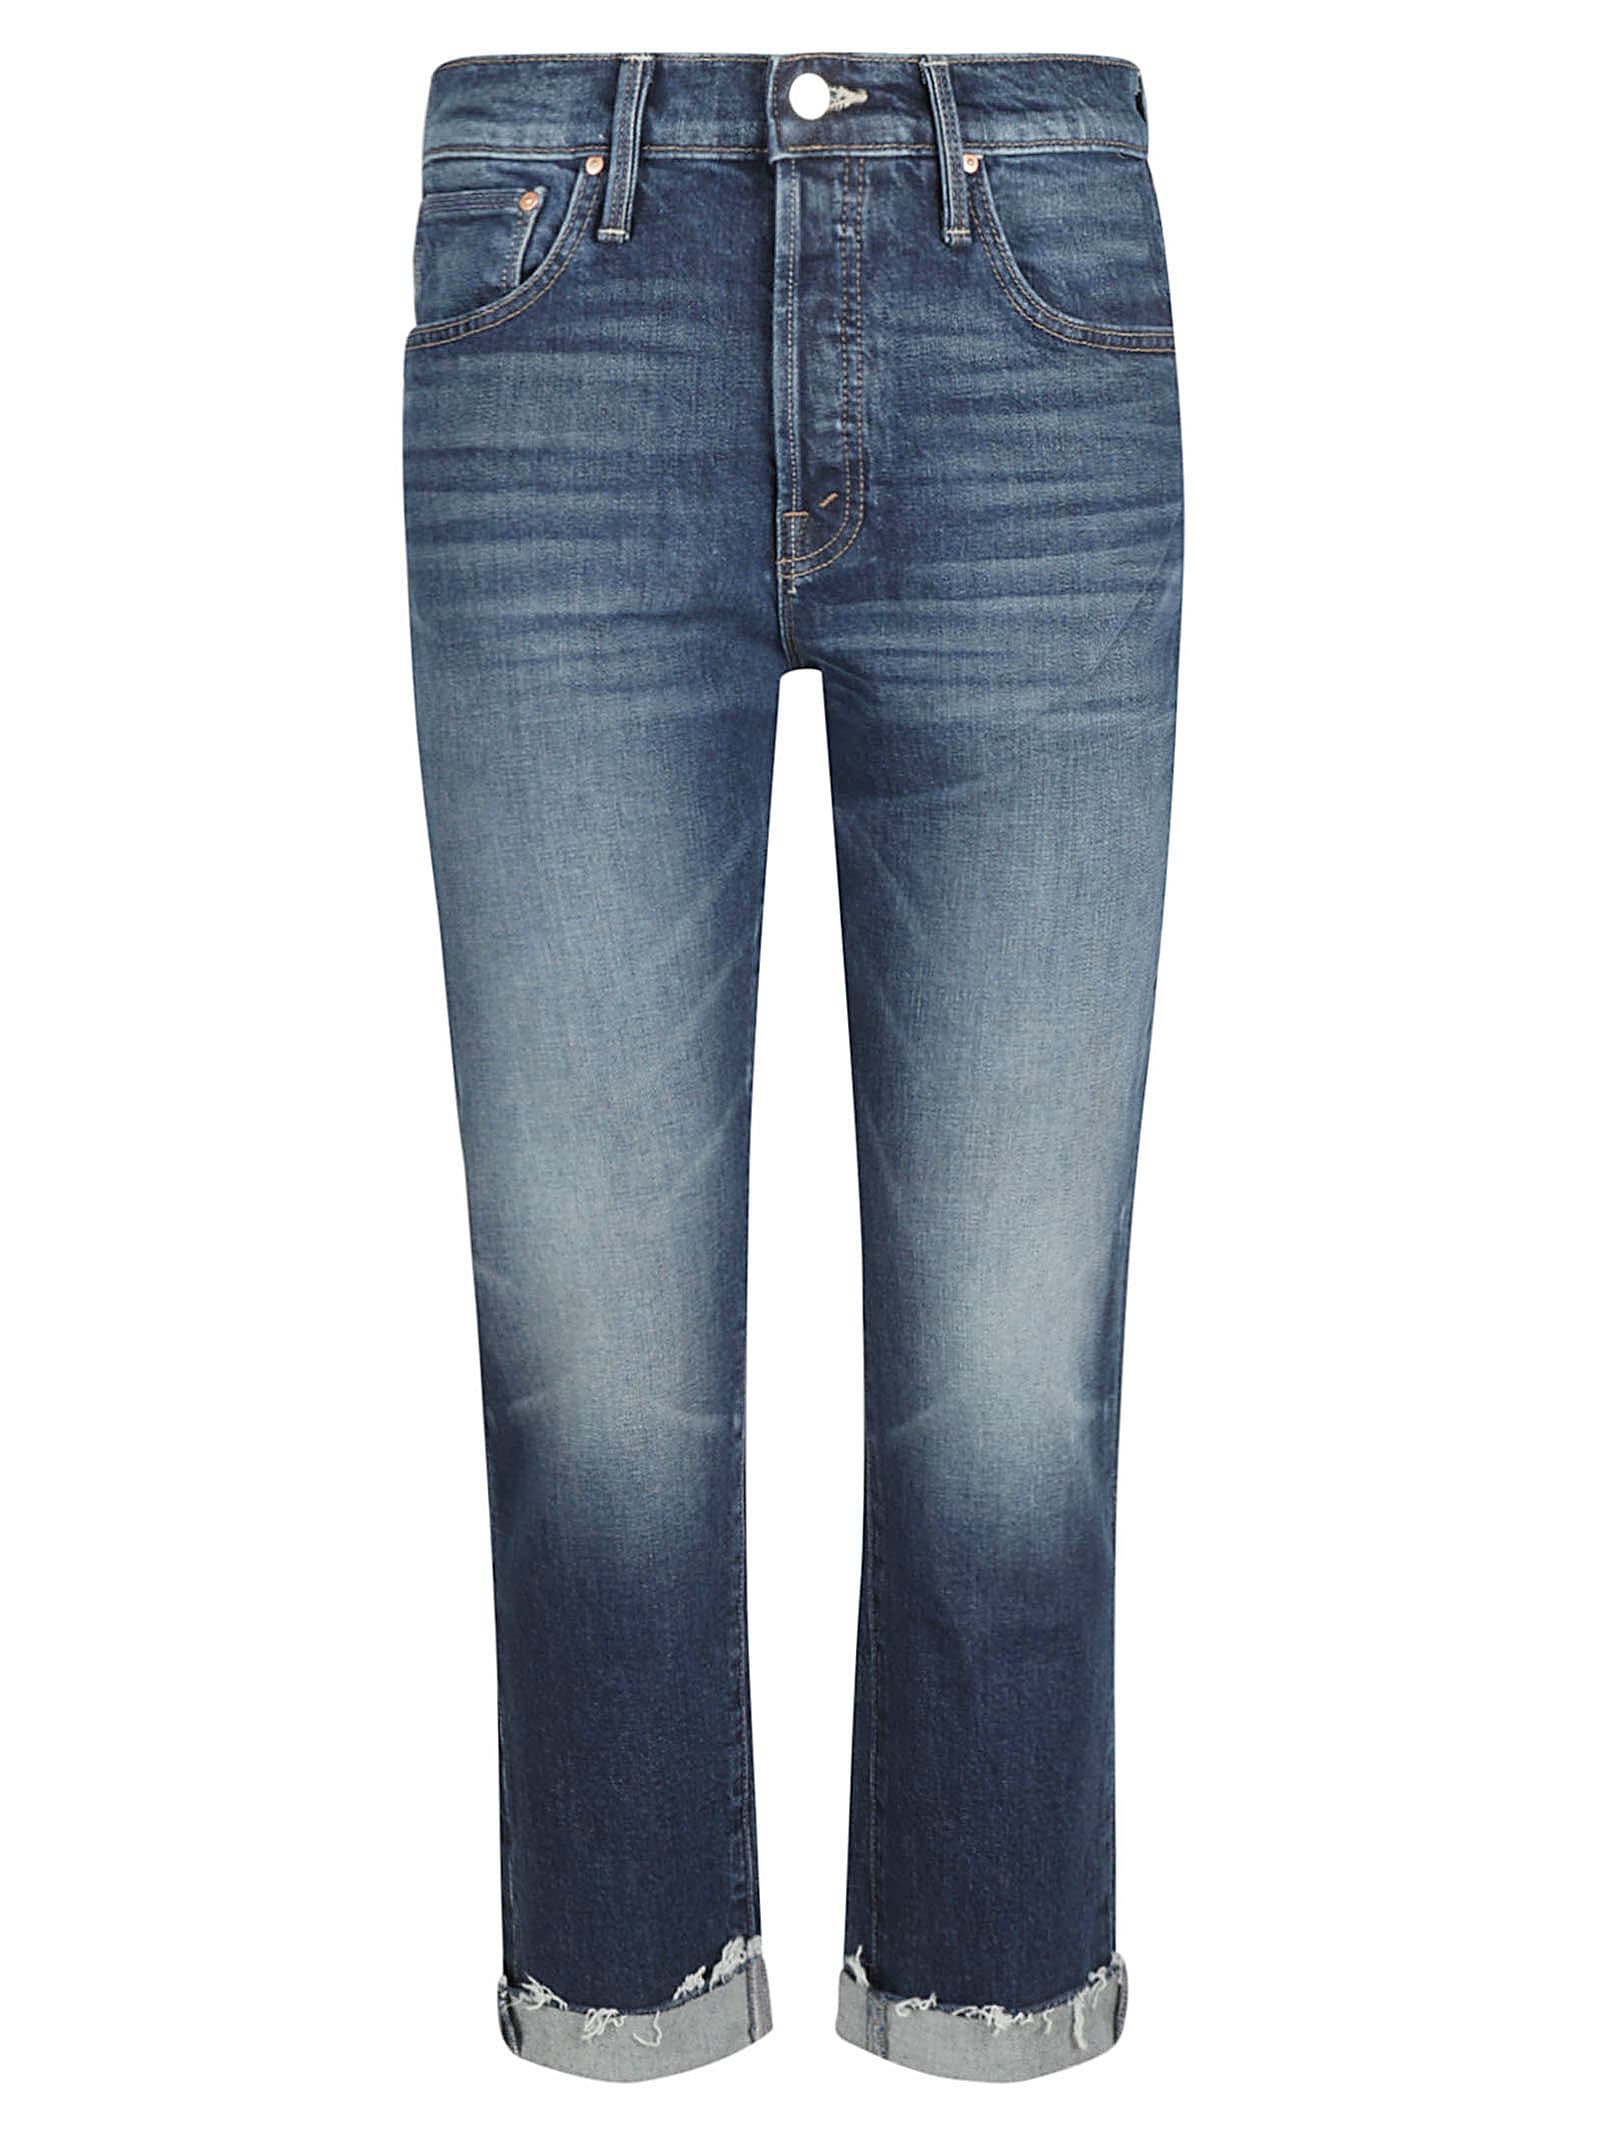 MOTHER The Ditcher Ankle Straight Leg Jeans in Smoking Section